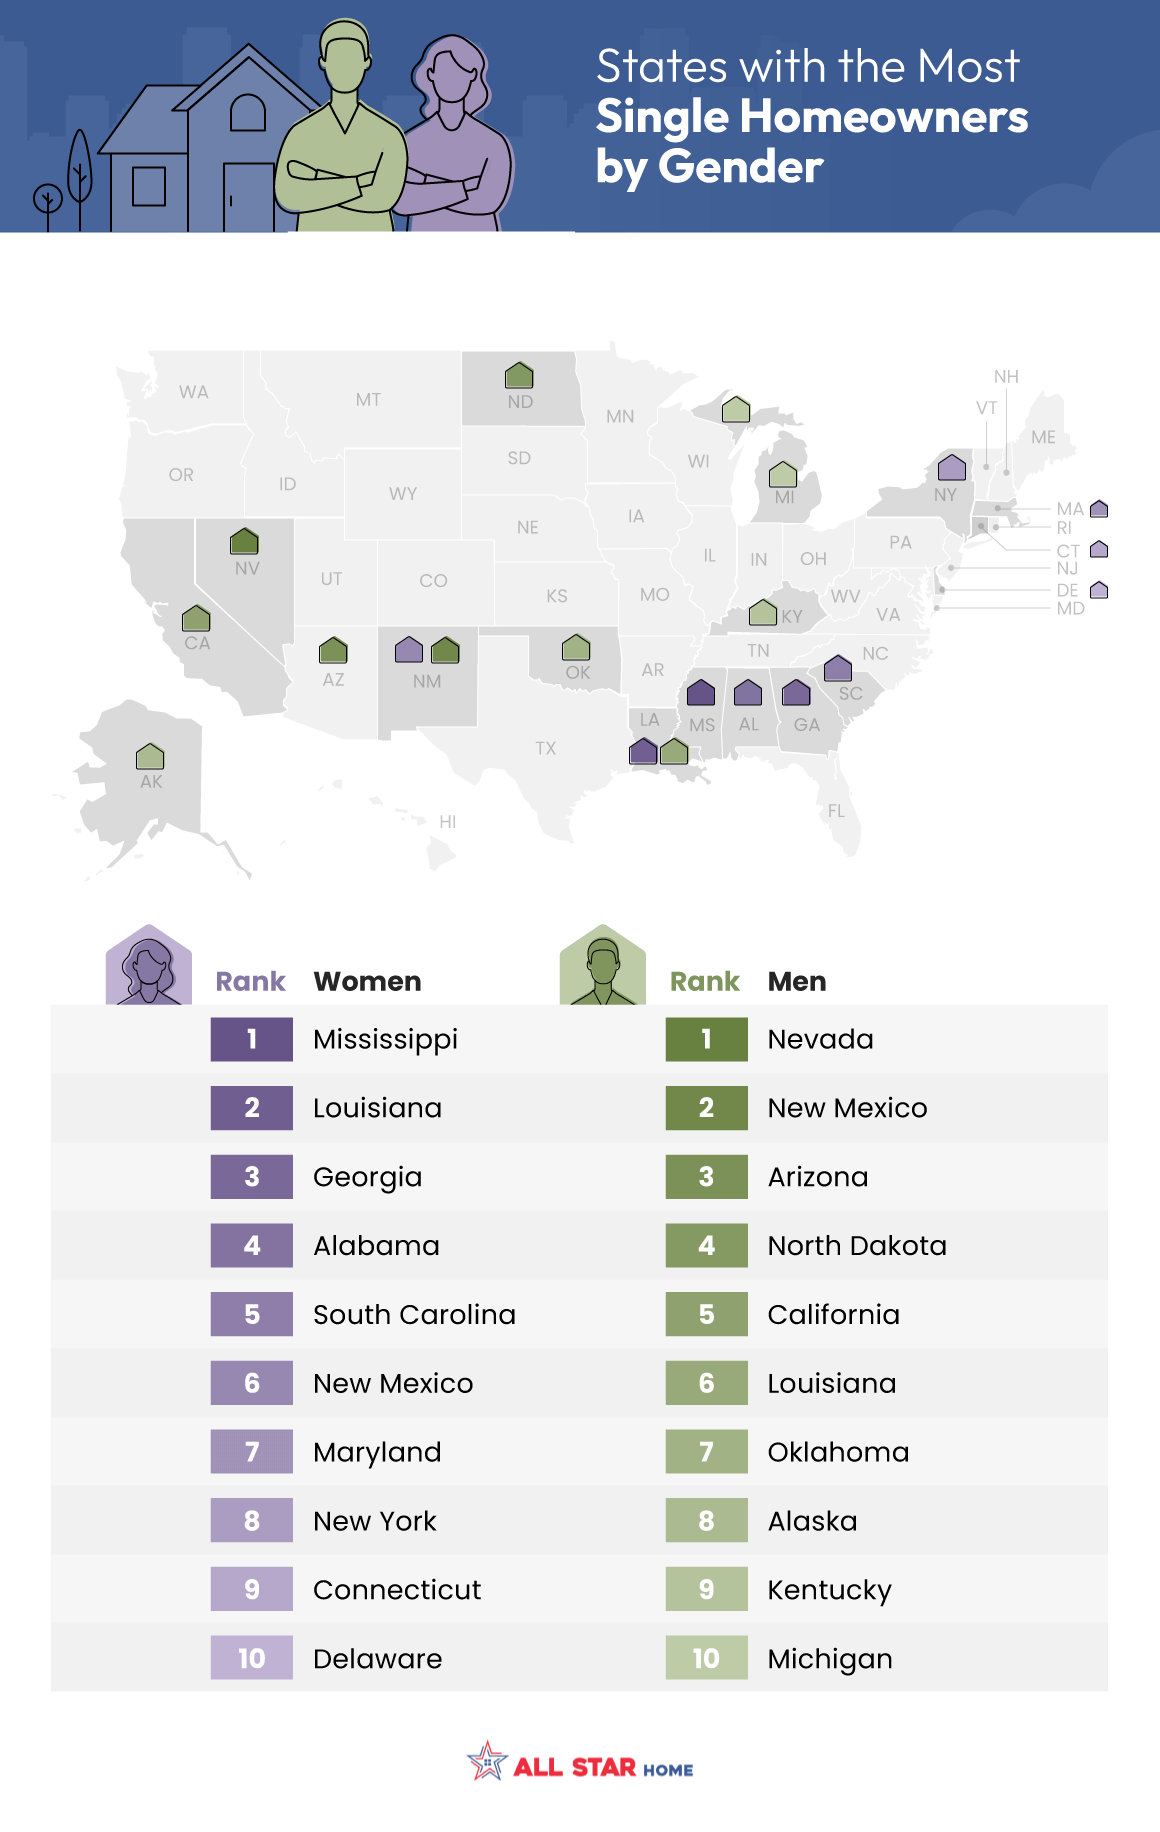 A ranking of the states with the most single homeowners by gender - infographic from AllStarHome.com